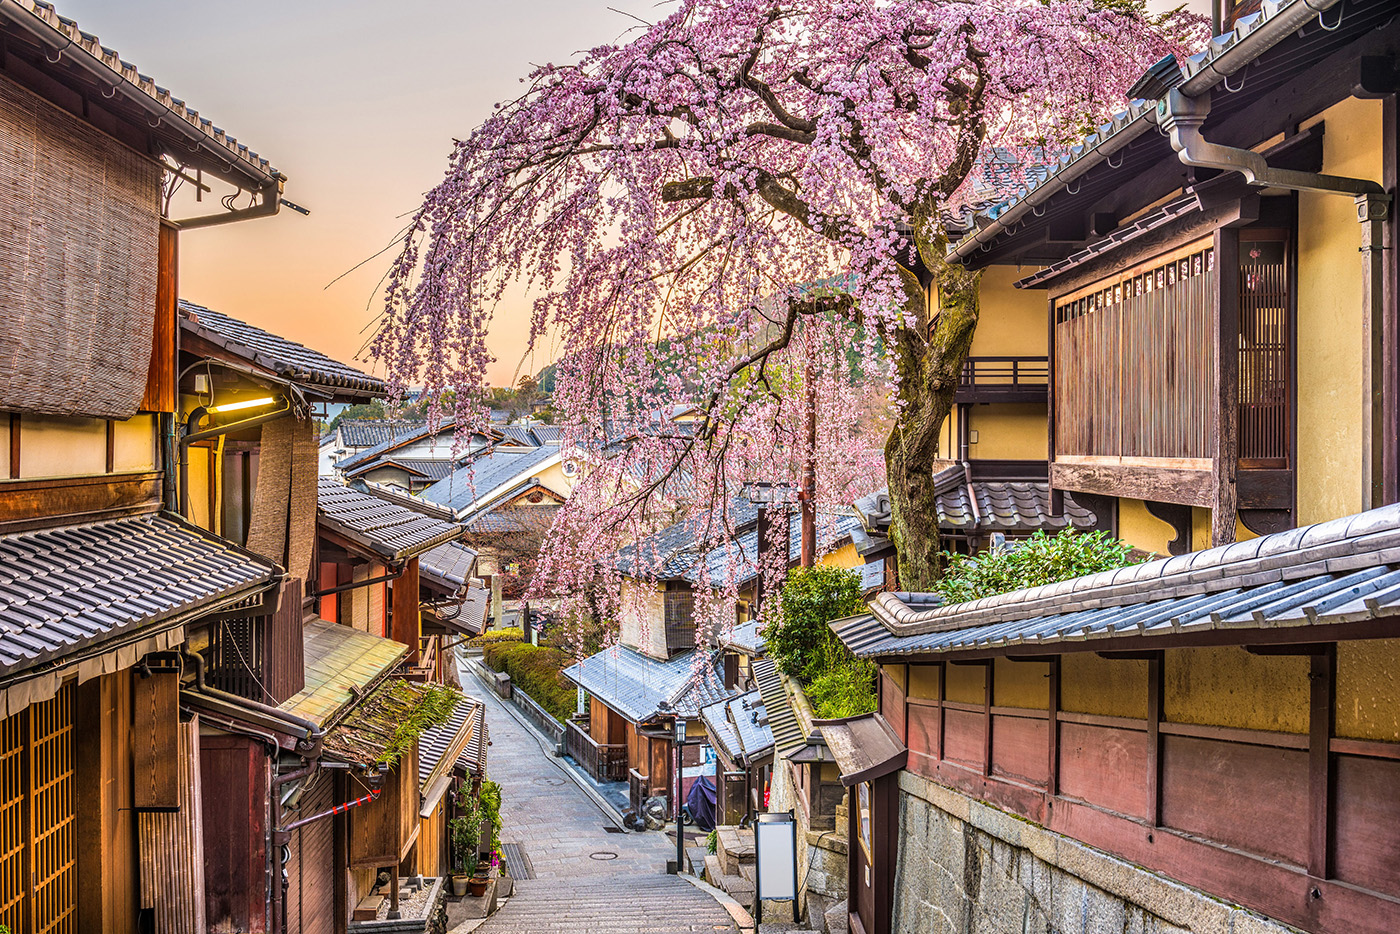 See cherry blossom amid Kyoto's temples, sweeping gardens and resplendent imperial palaces